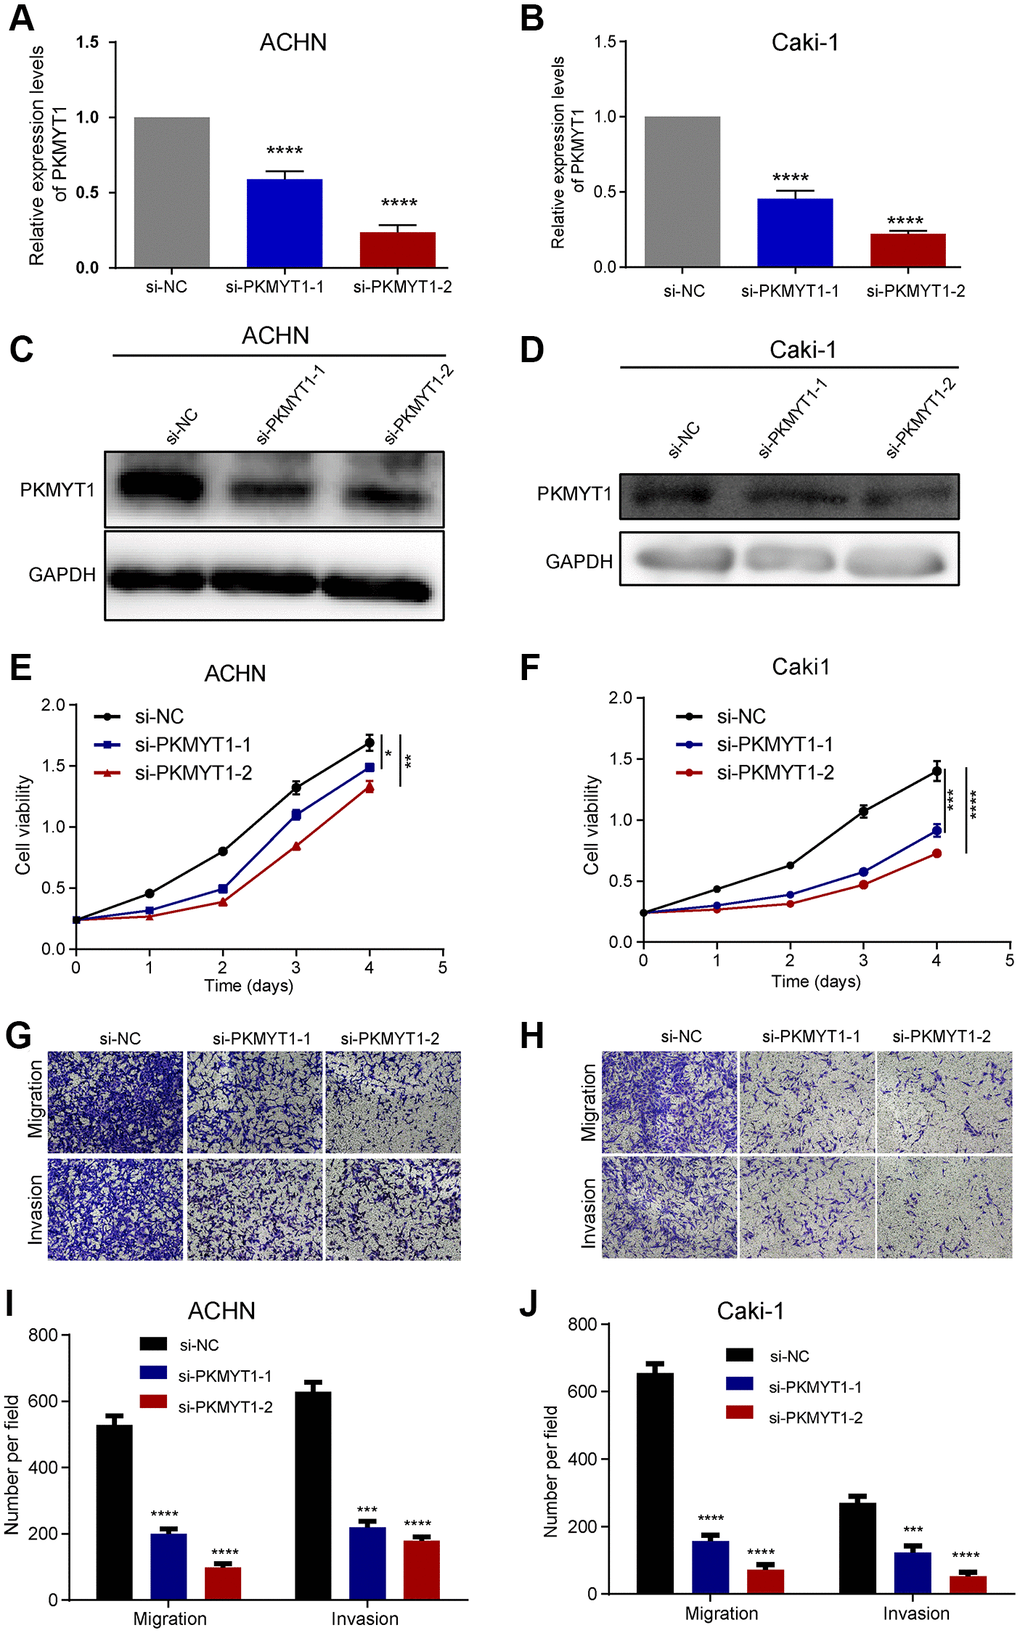 PKMYT1 promotes the proliferation, migration, and invasion of renal cancer cells in vitro. The mRNA expression of PKMYT1 in ACHN (A) and Caki-1 cells (B) was measured using real-time quantitative reverse transcription-PCR. The protein expression of PKMYT1 in ACHN (C) and Caki-1 cells (D) by western blotting assays. Cell Counting Kit-8 assays were used to detect the effect of PKMYT1 knockdown on cell proliferation in ACHN (E) and Caki-1 (F) cells. Representative images of migration and invasion assays for ACHN (G) and Caki-1 (H) cells. Transwell migration and invasion assays indicated that the migration and invasion abilities of PKMYT1 were weakened in siRNA groups for ACHN (I) and Caki-1 (J) cells. Data are shown as the mean ± standard deviation from three independent experiments, and were compared to the respective si-NC group. ****P ***P **P *P 